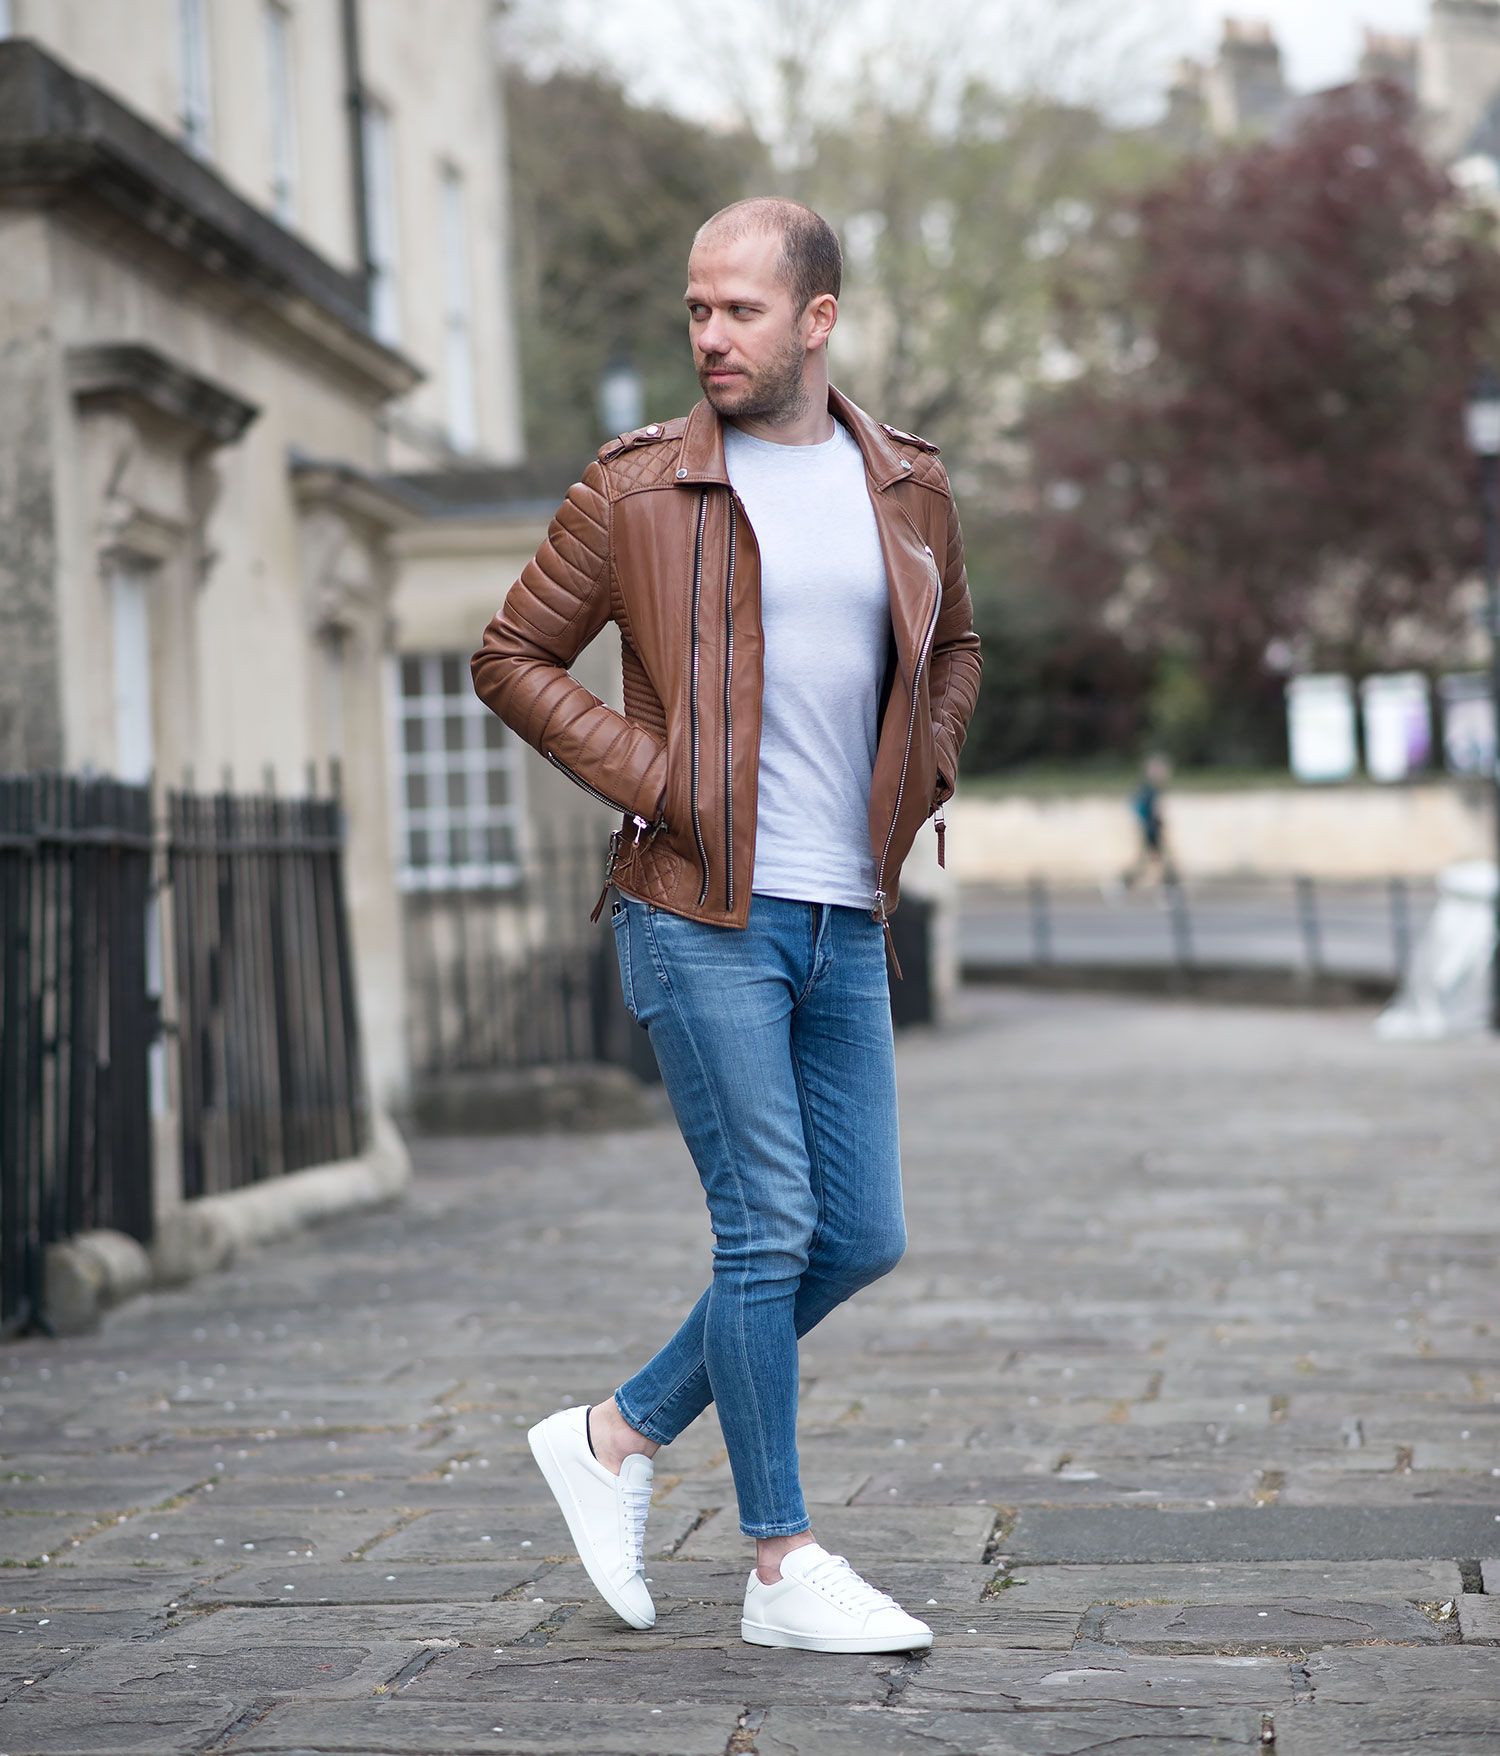 Boda Skins Antique Brown Biker Leather Jacket And Saint Laurent Sneakers  Outfit | Your Average Guy